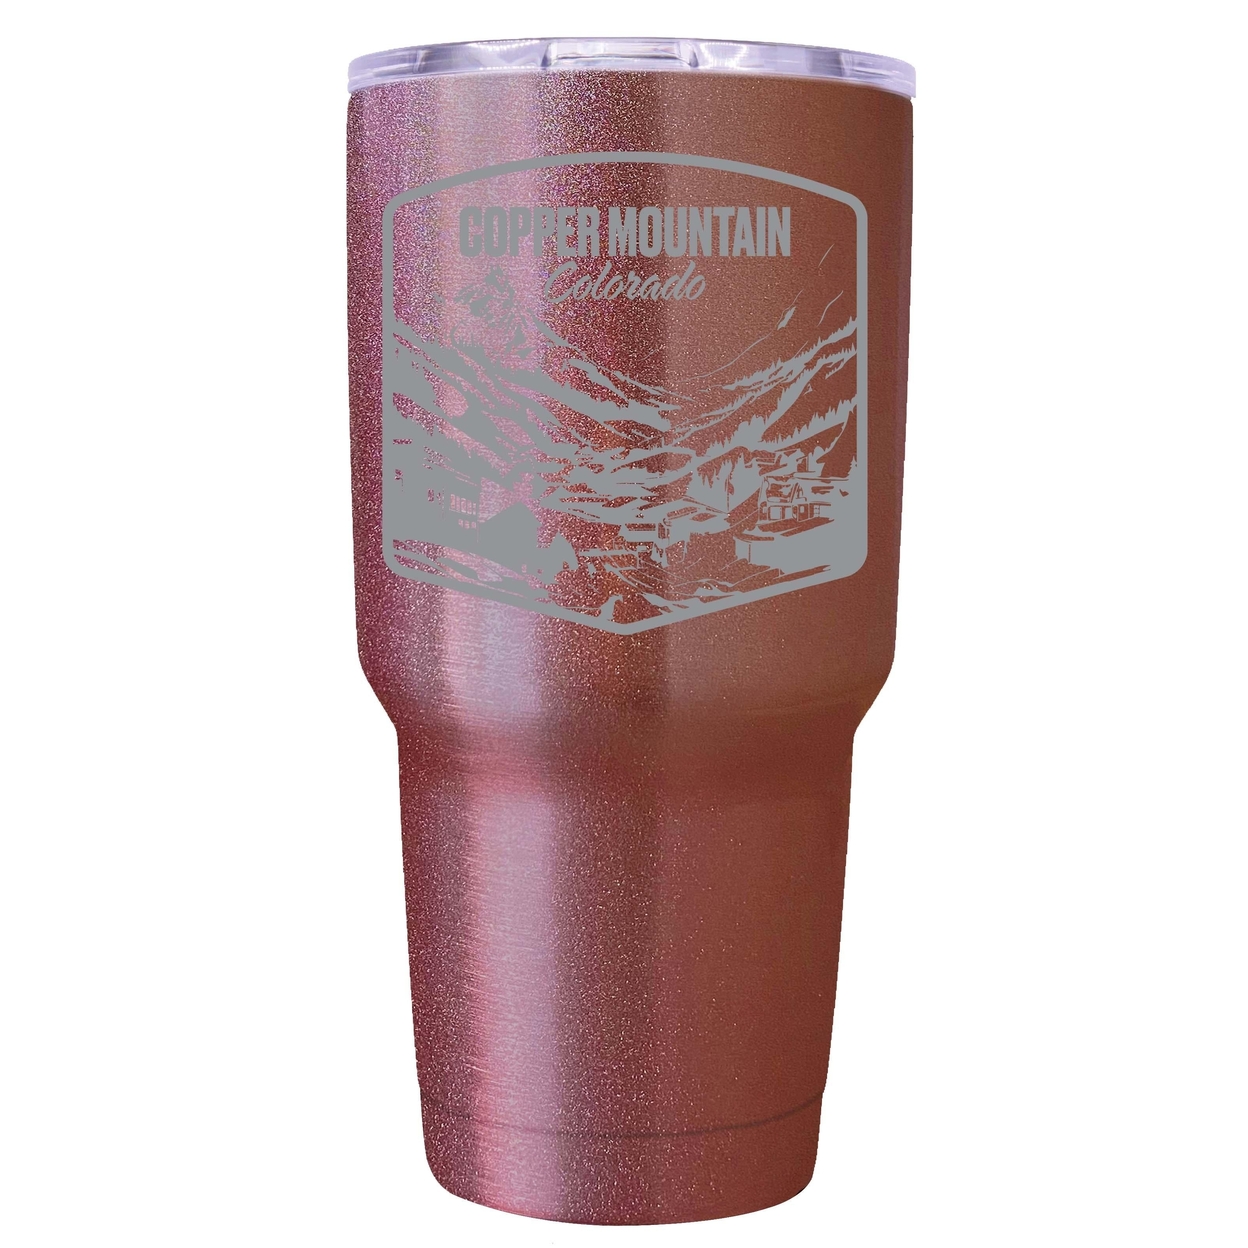 Copper Mountain Souvenir 24 Oz Engraved Insulated Tumbler - Rose Gold,,4-Pack